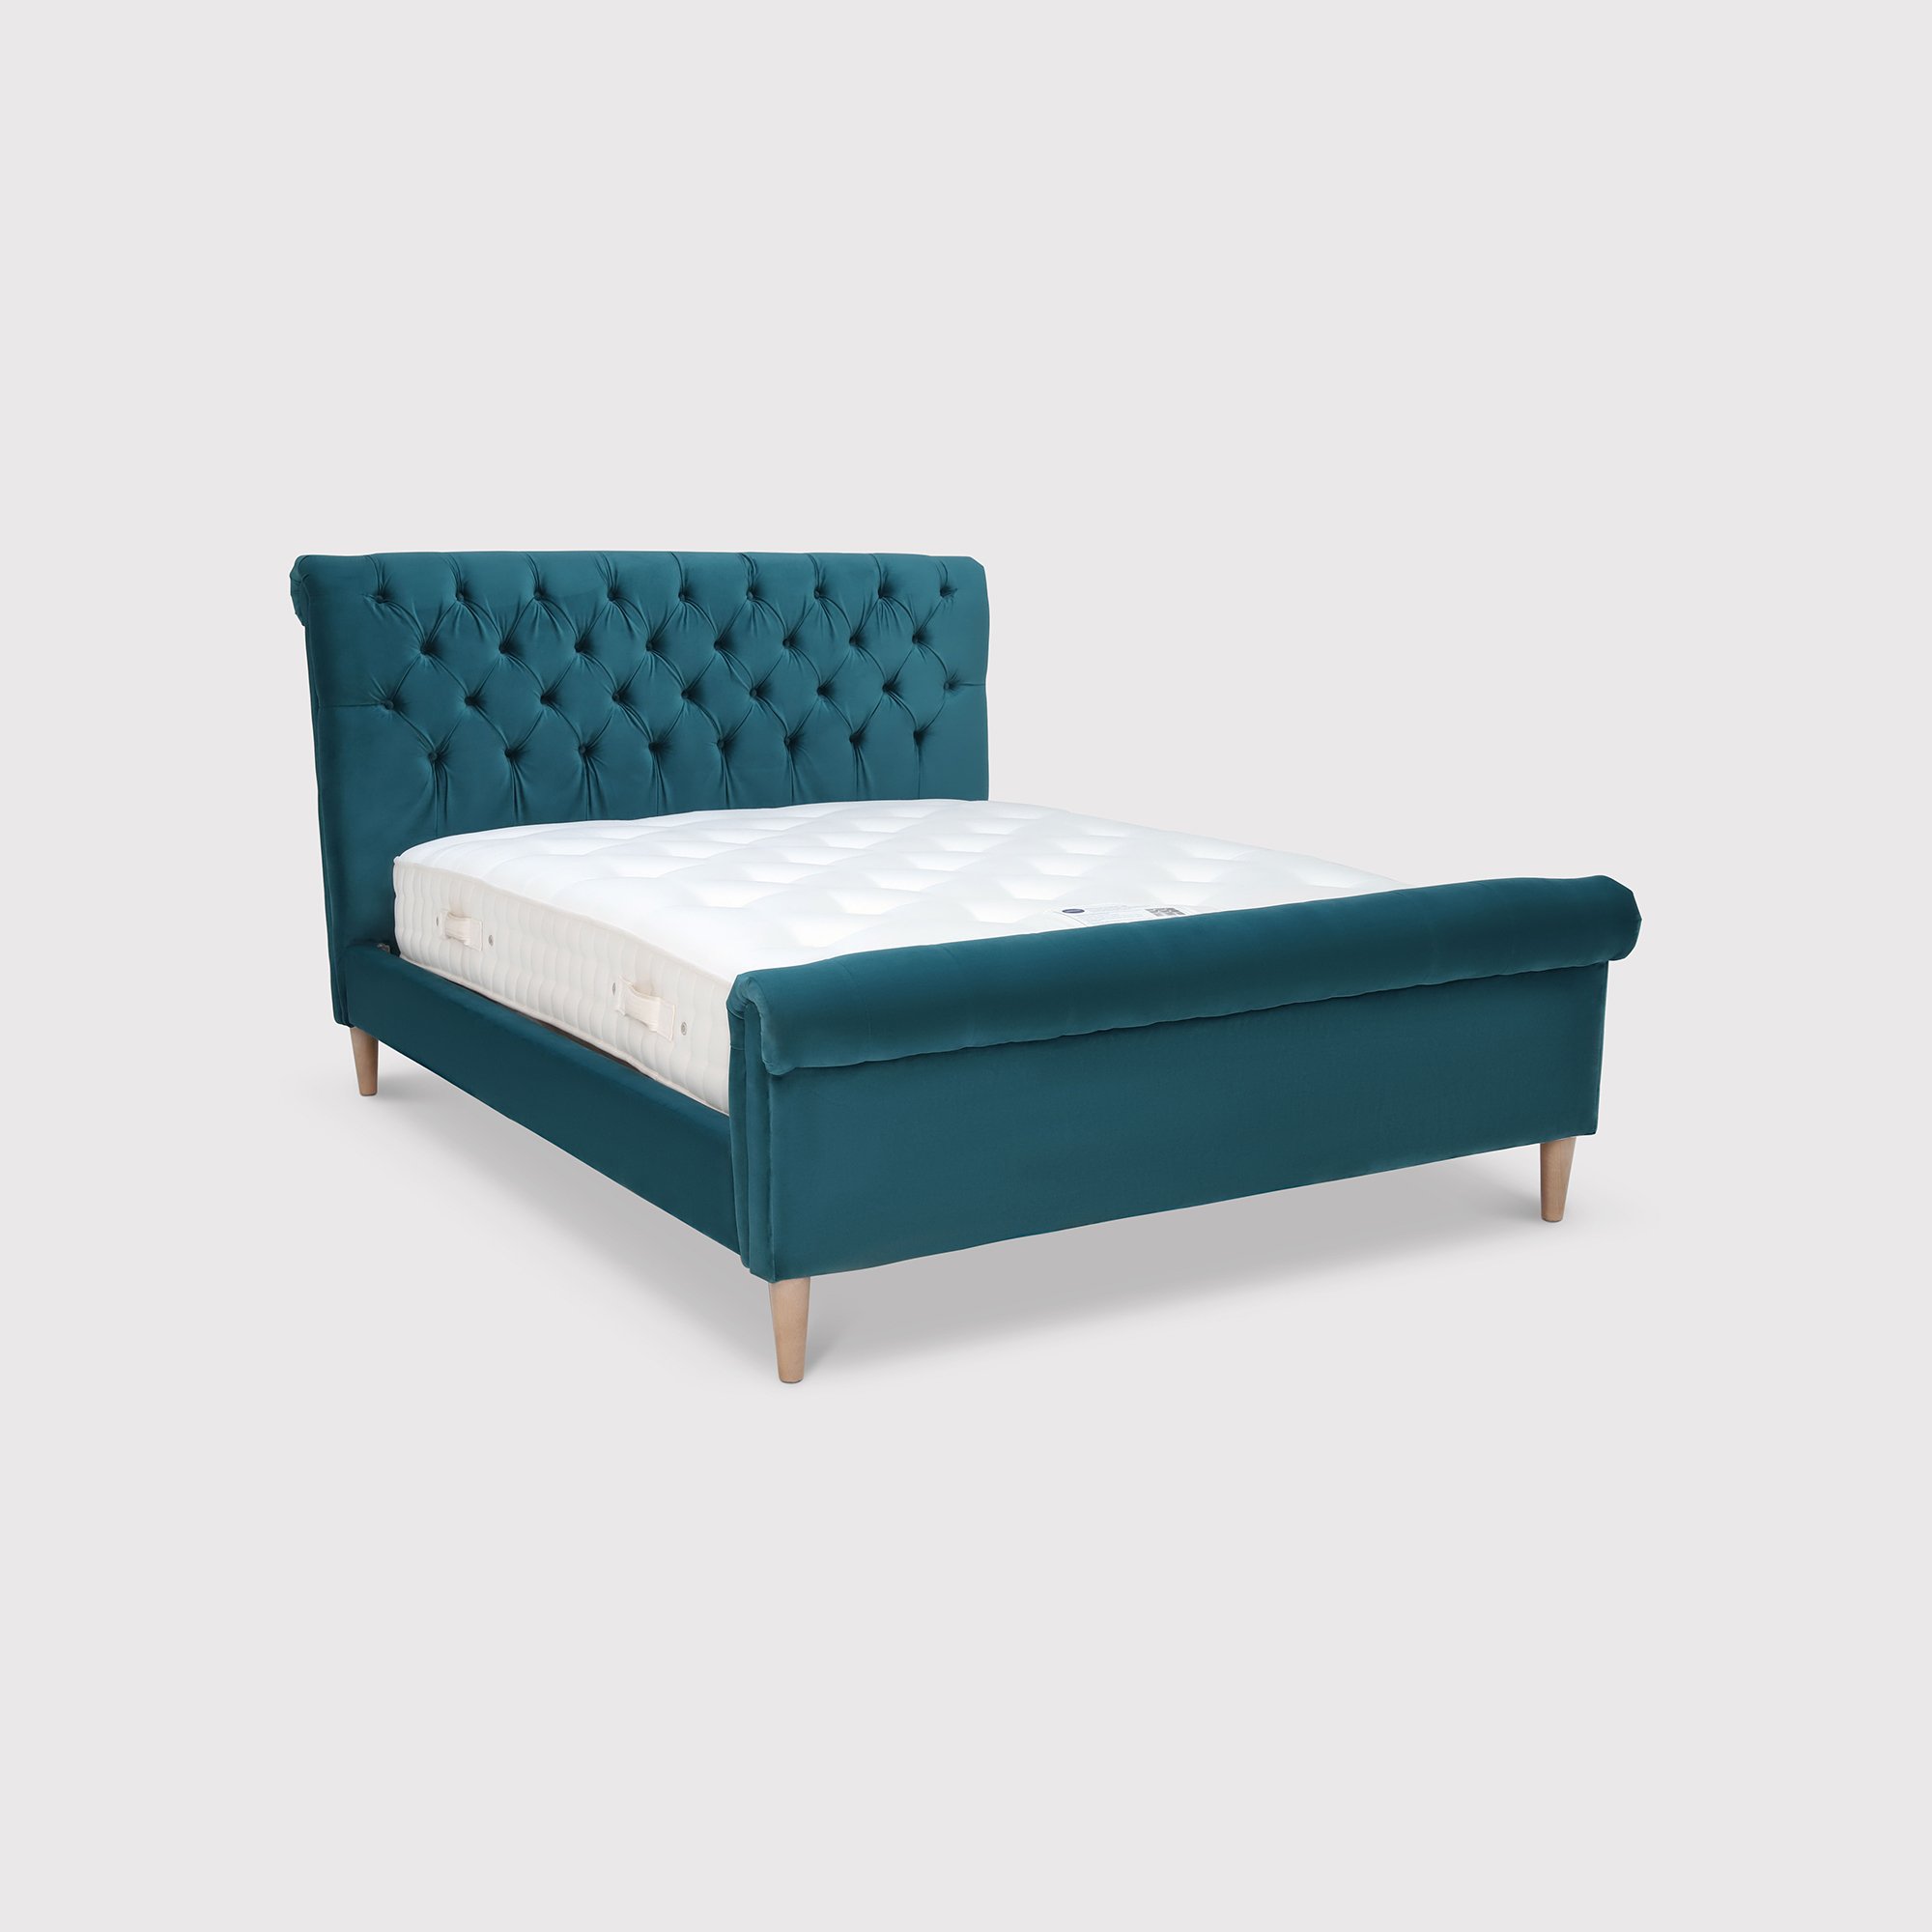 Hadley Double Bed Frame, Teal | Barker & Stonehouse